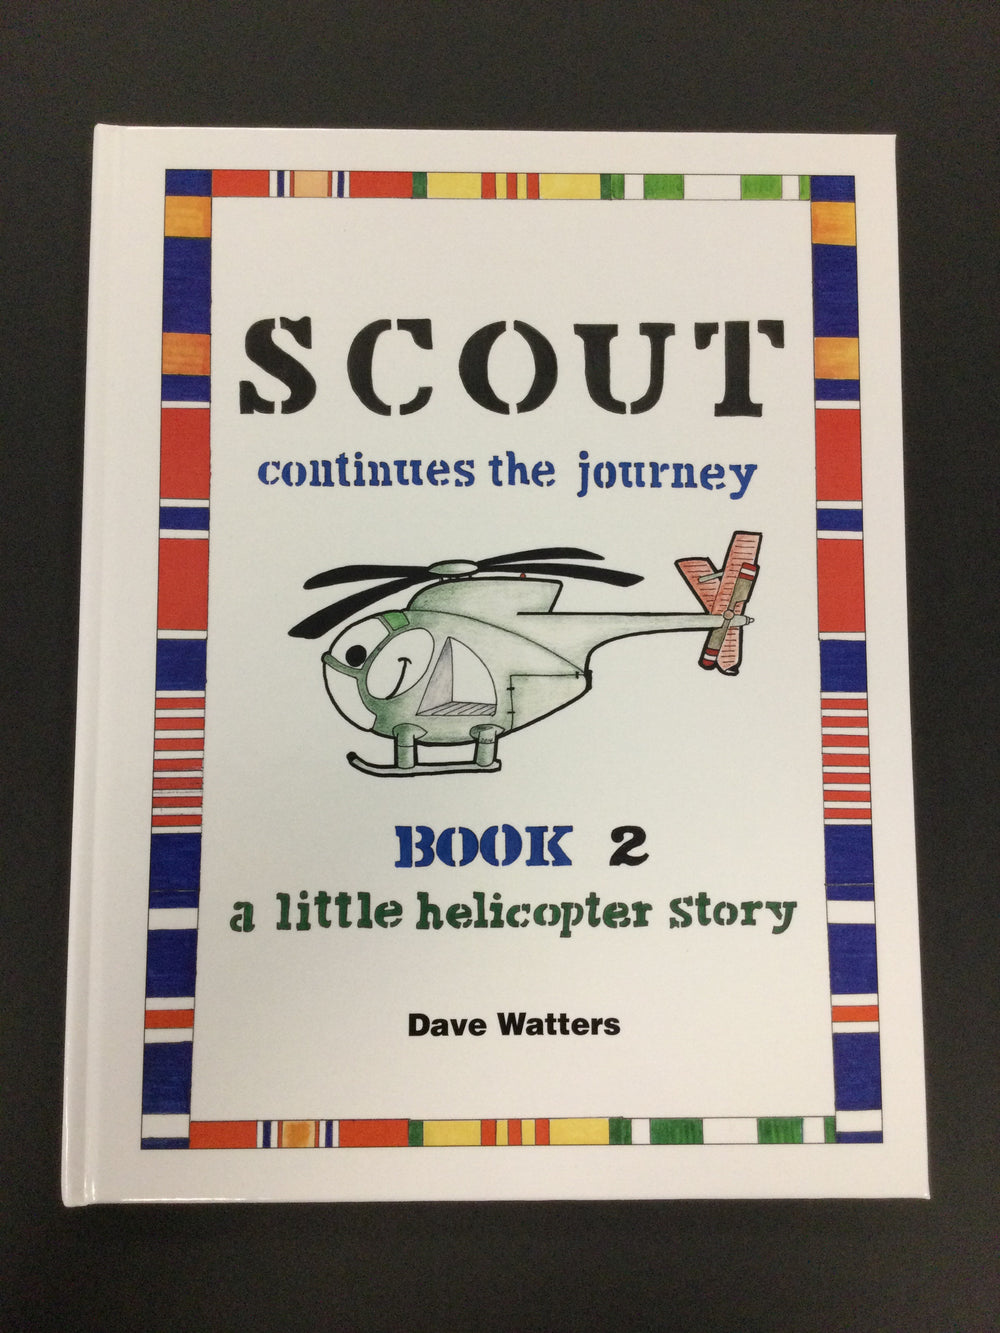 Scout Continues the Journey Book 2 by Dave Watters